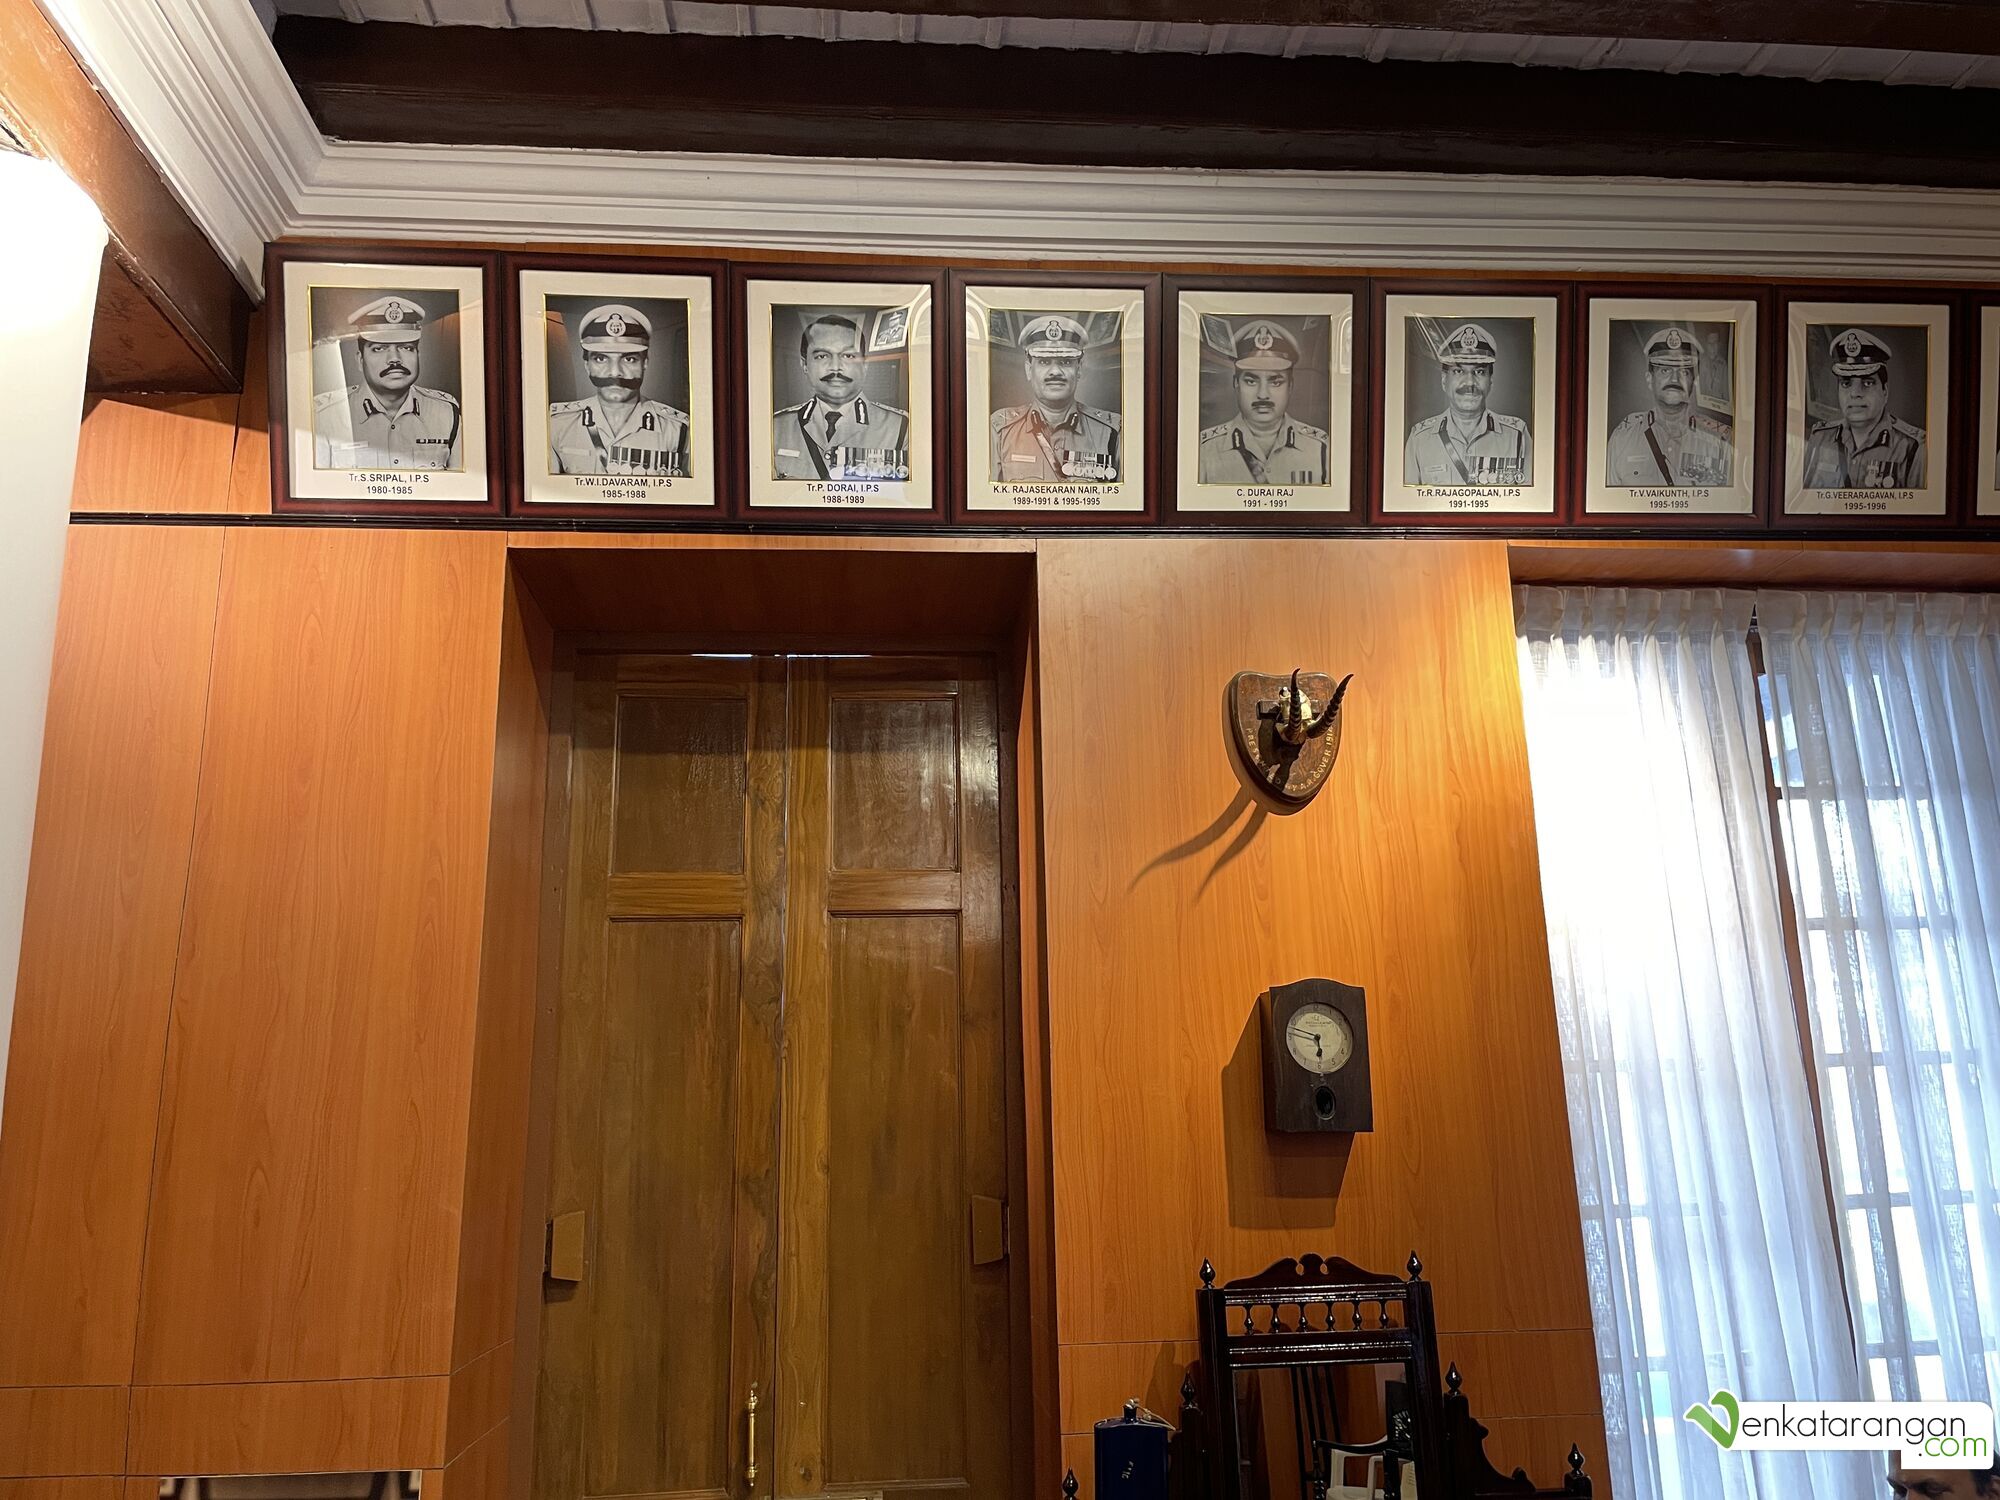 A row of photos of the previous Chennai Commissioner(s) of Police